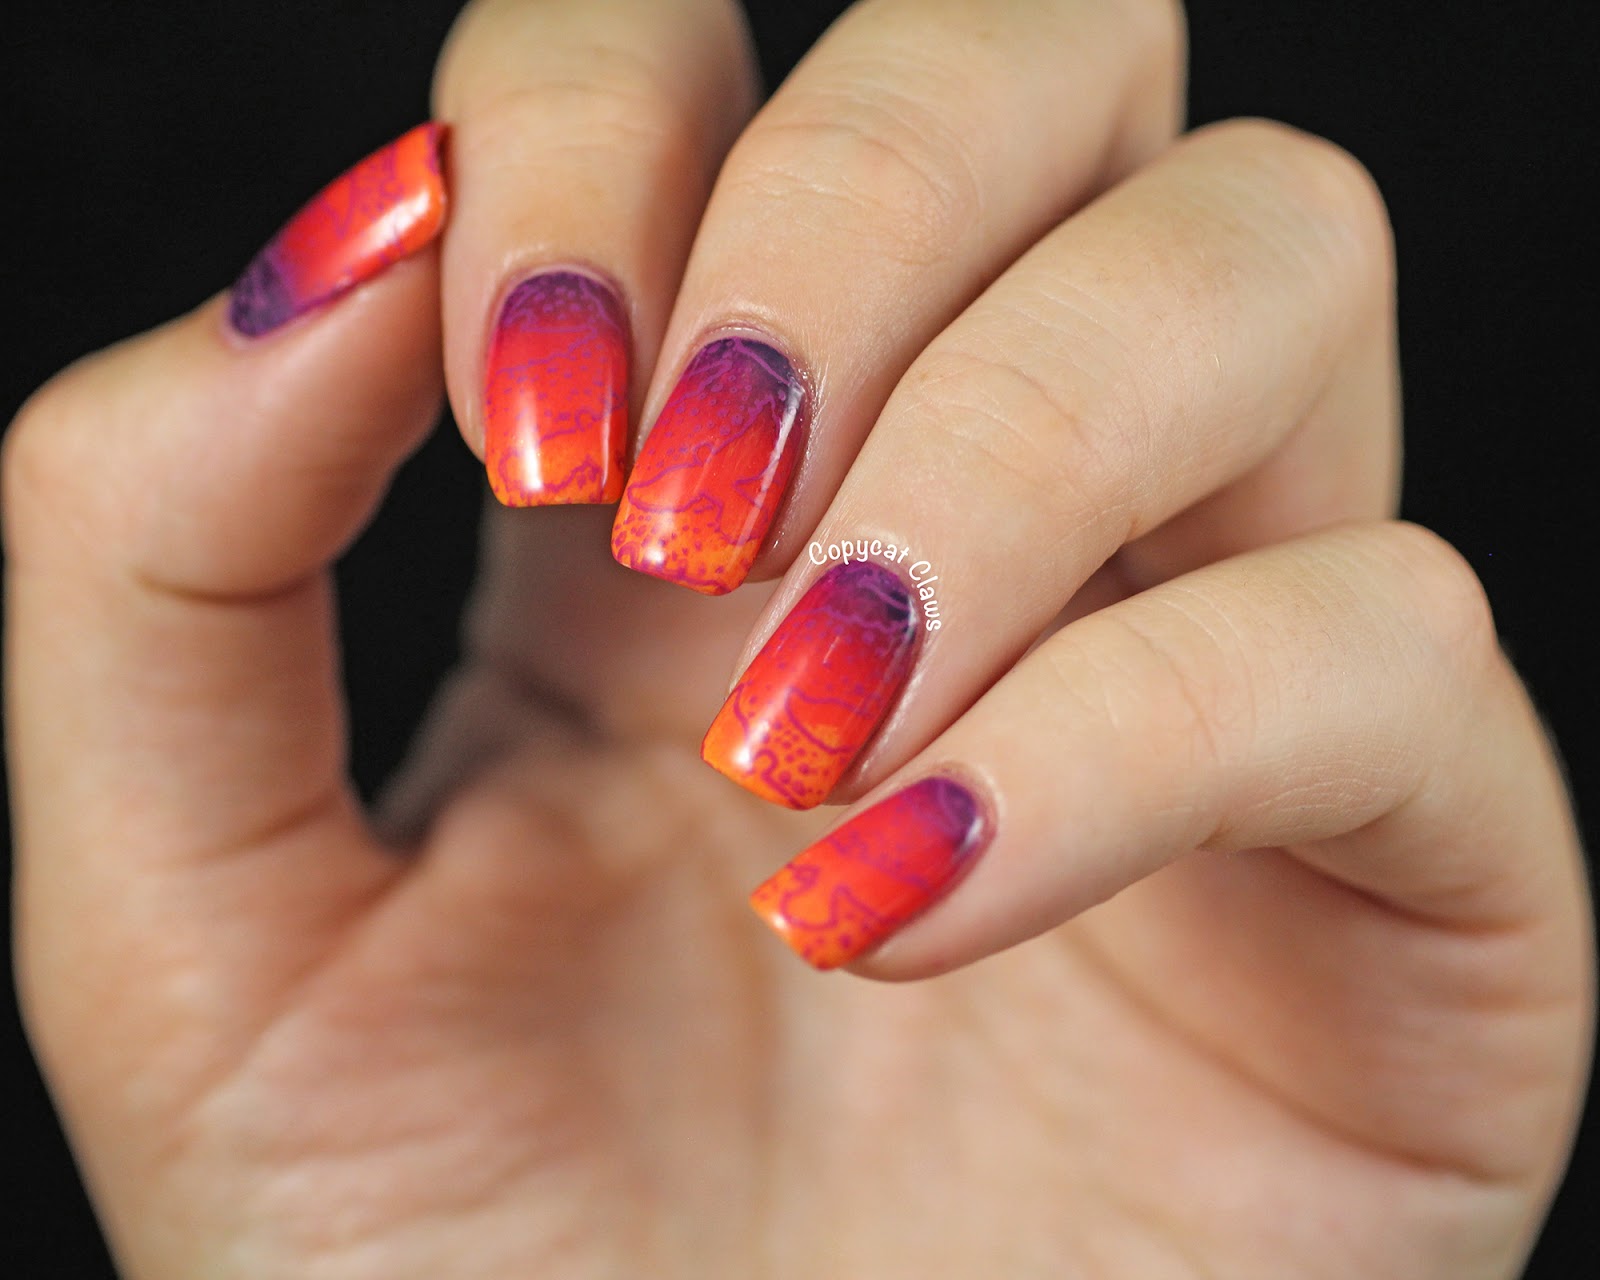 Copycat Claws: 31DC2014 Day 10 - Gradient Nails